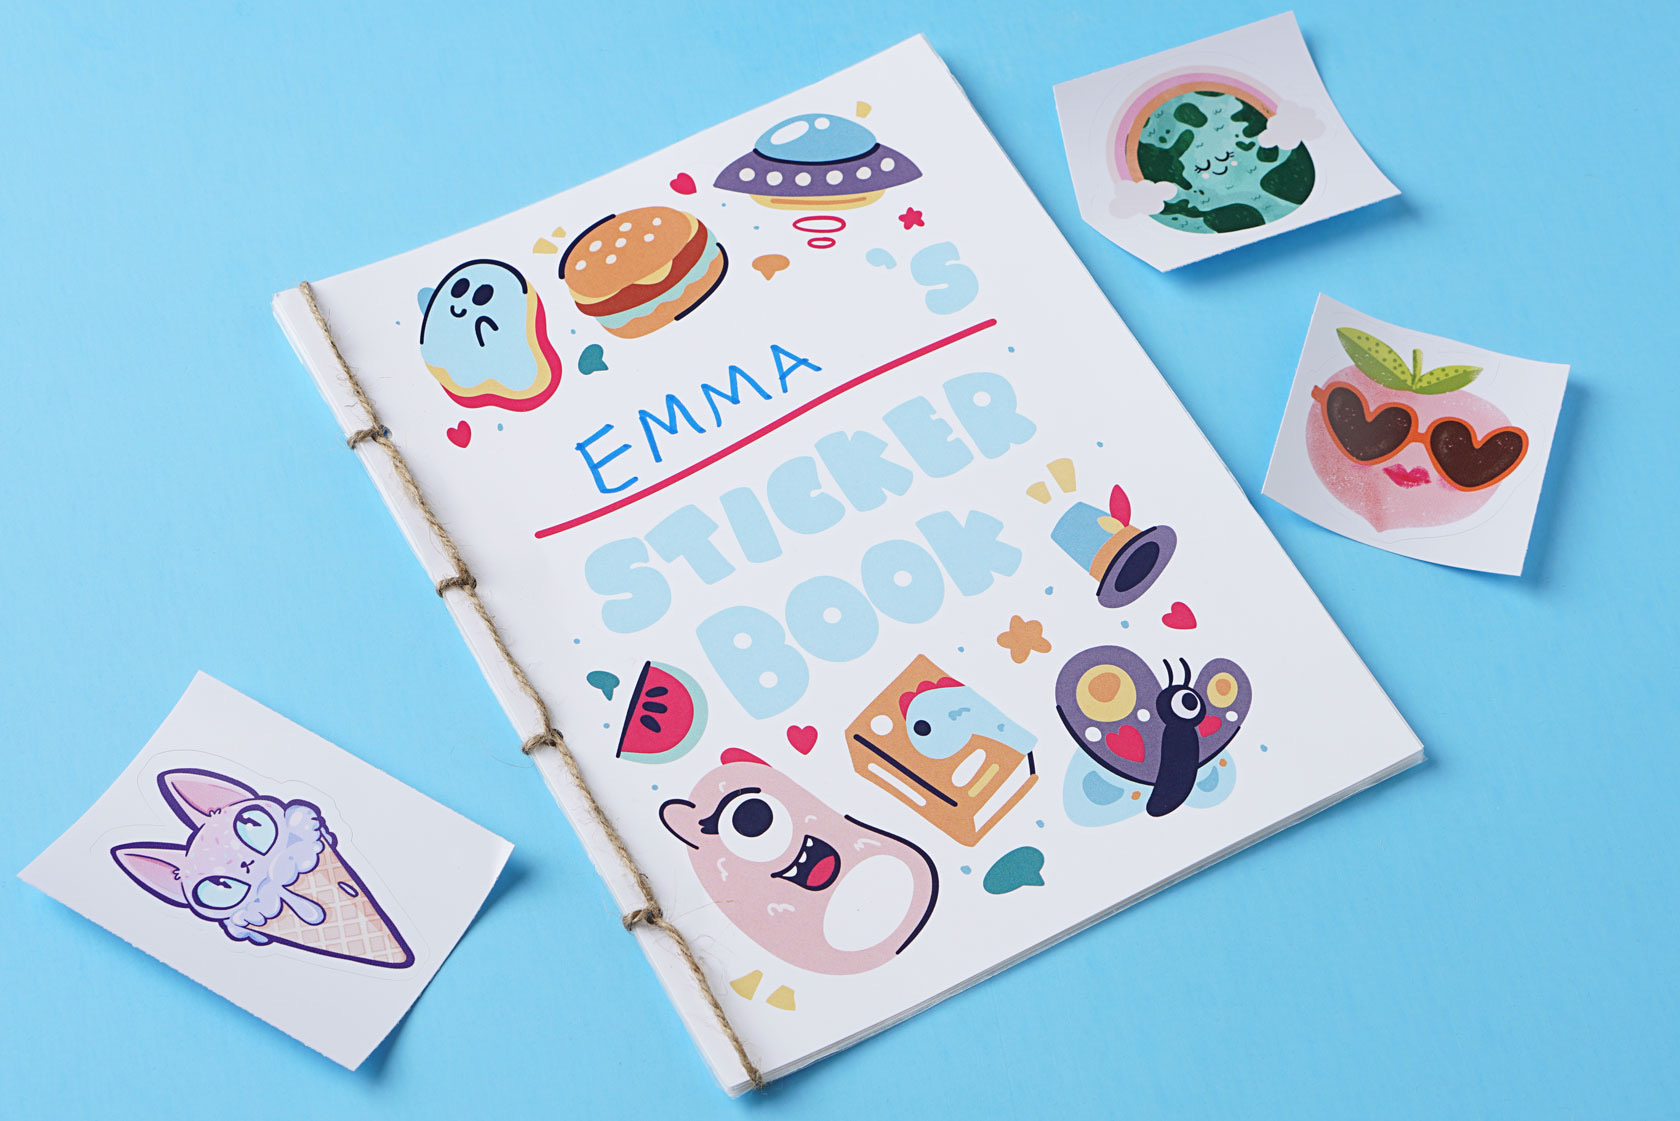 How to Make a DIY Sticker Book + Printable Activity Pages - Sandee Booth